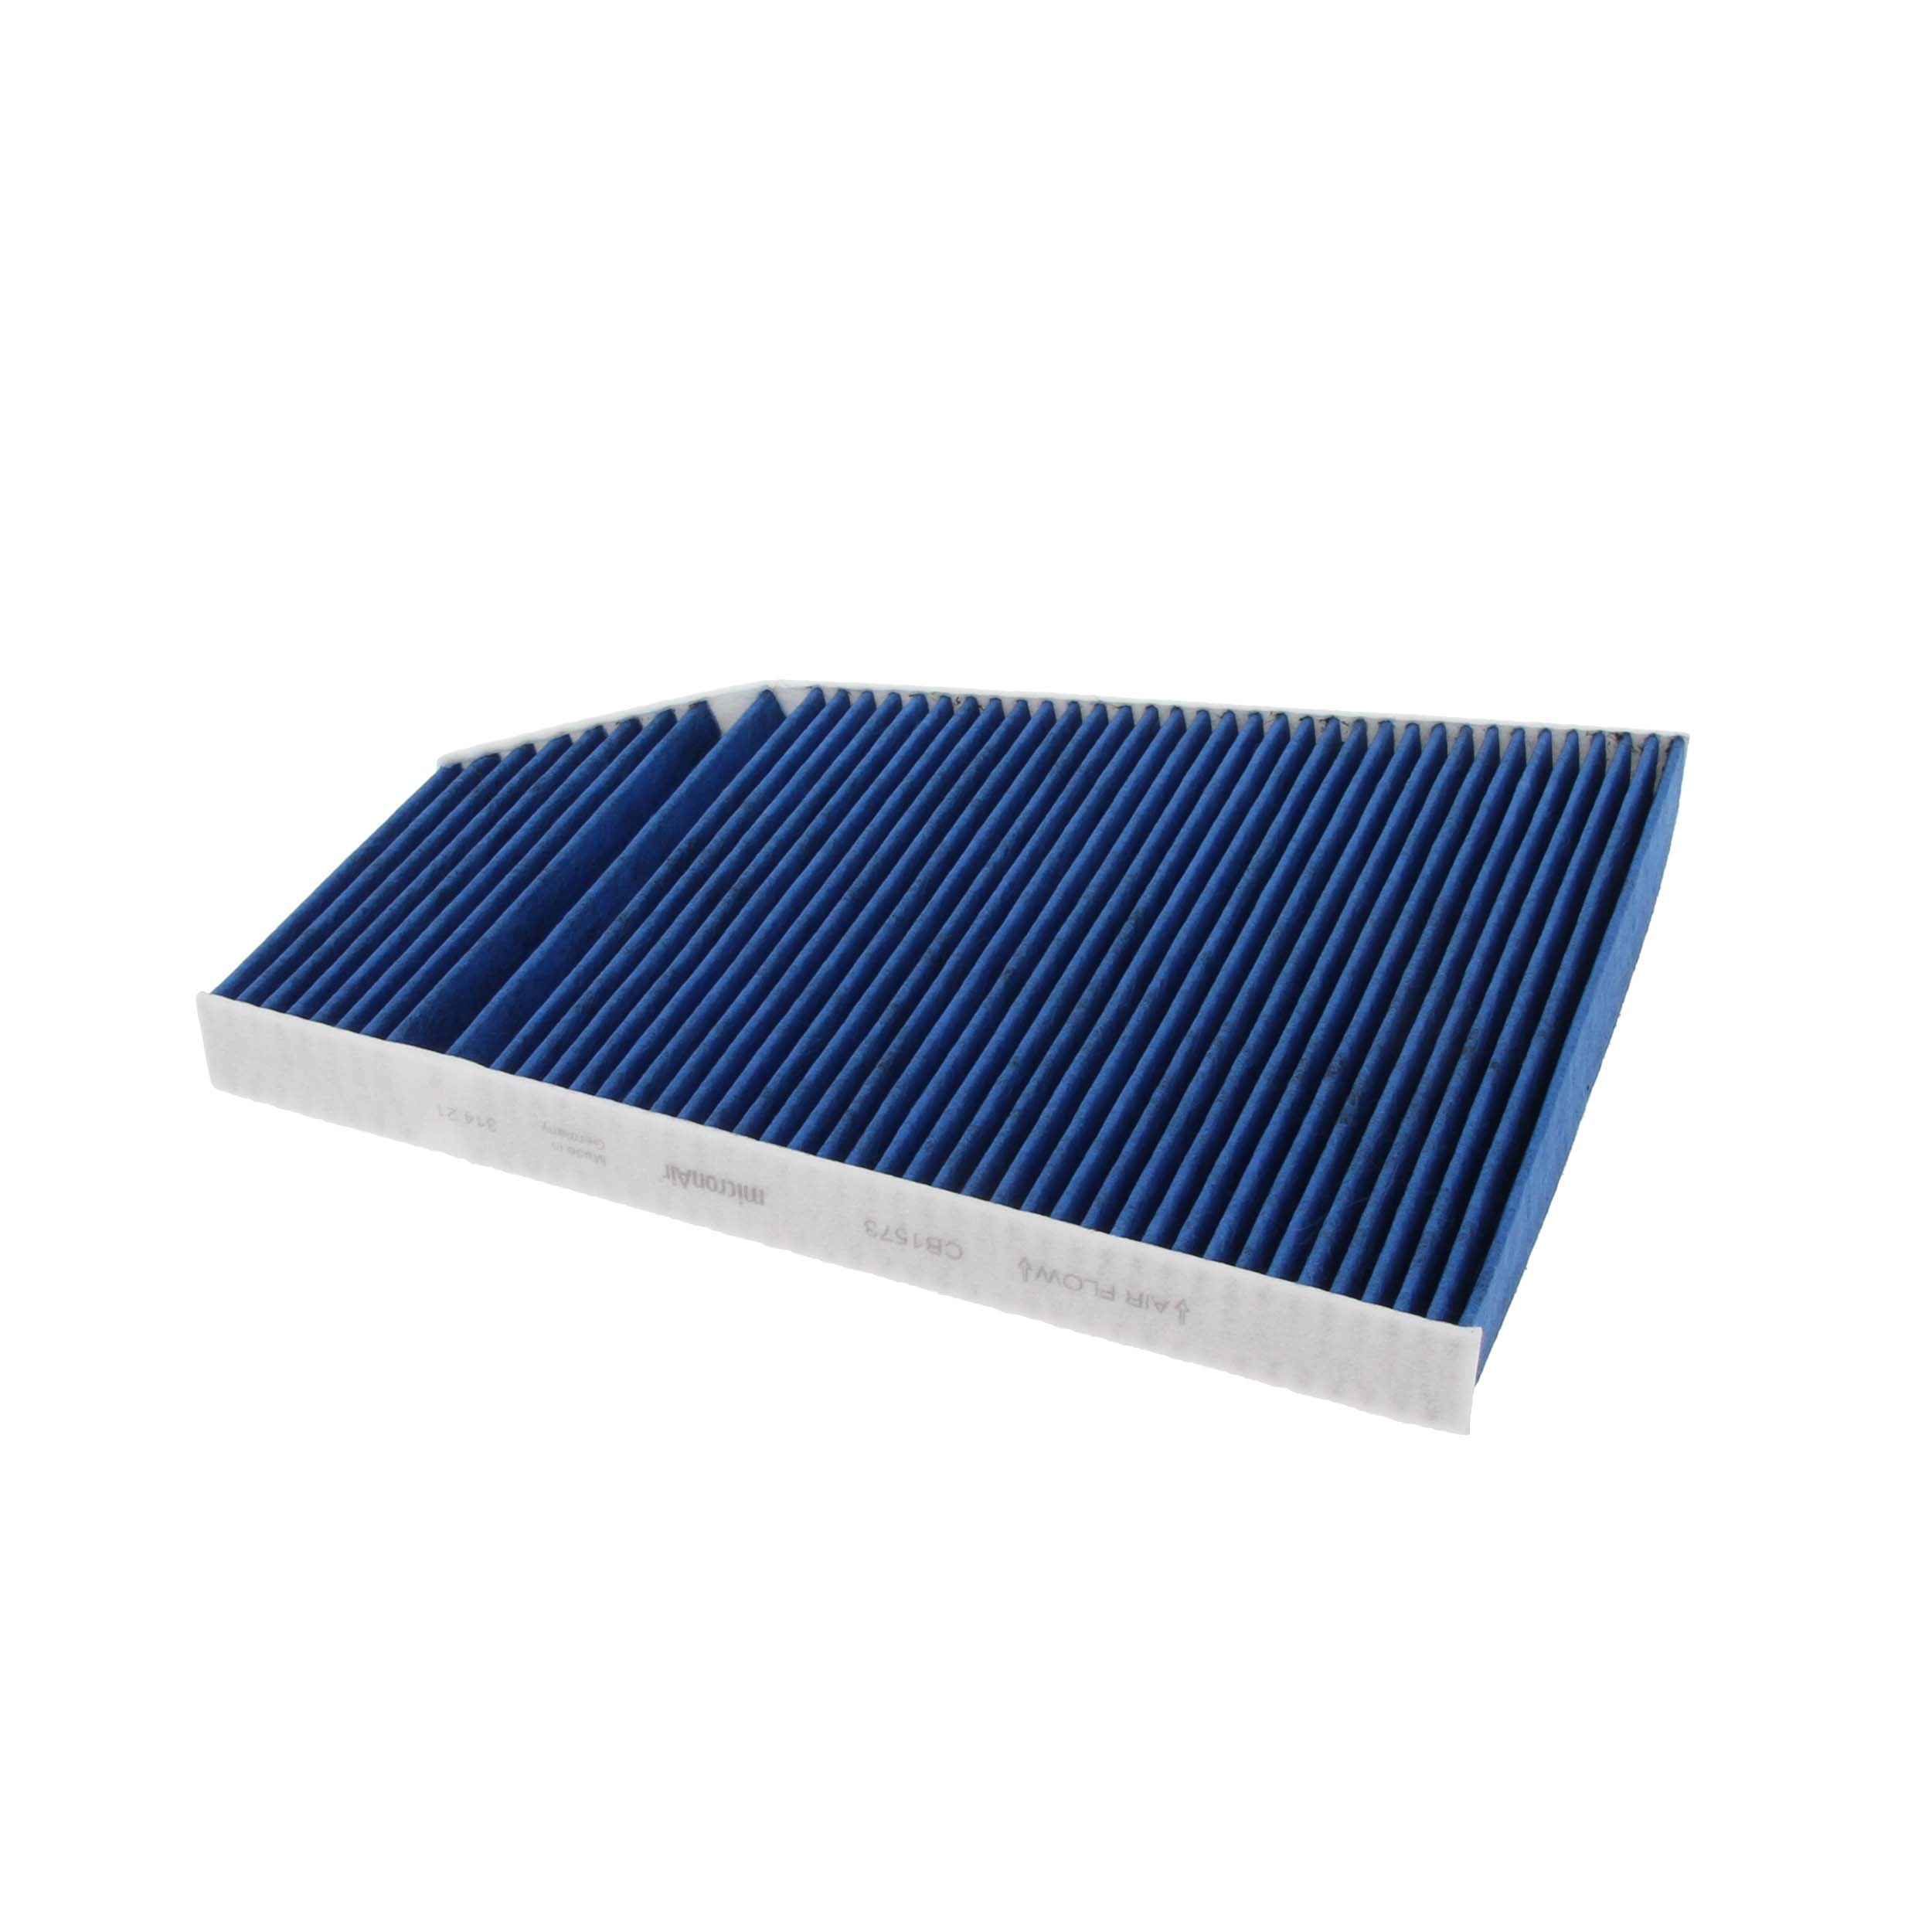 Cabin air filter CORTECO with anti-allergic effect, Particulate filter (PM 2.5), with antibacterial action, with fungicidal effect, 322 mm x 260 mm x 30 mm - 49462772